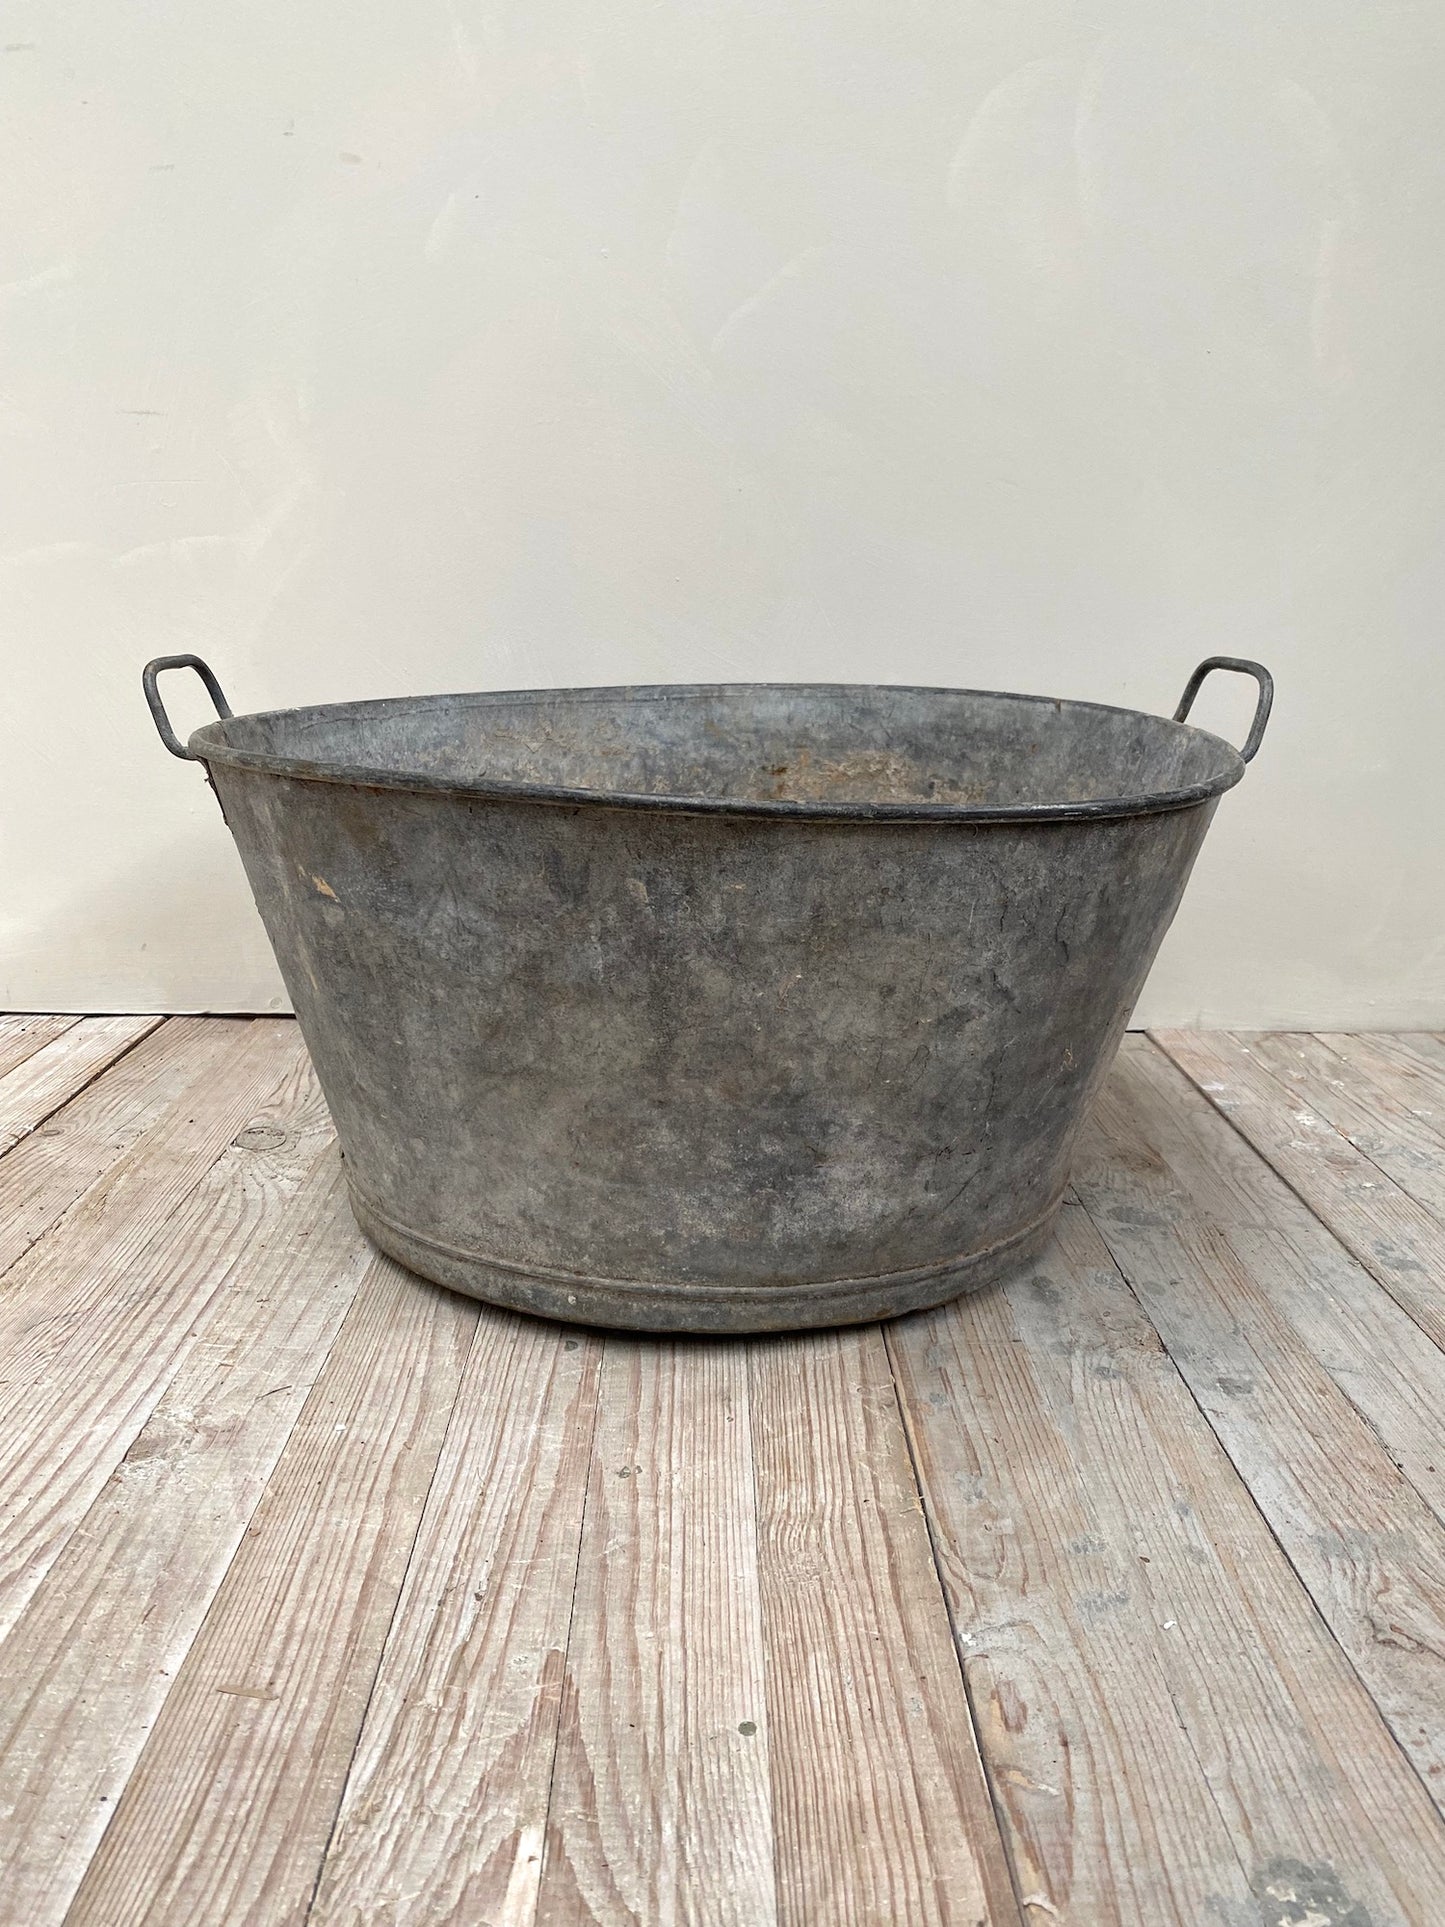 Antique French Small Round Zinc Washing Tub with Handles